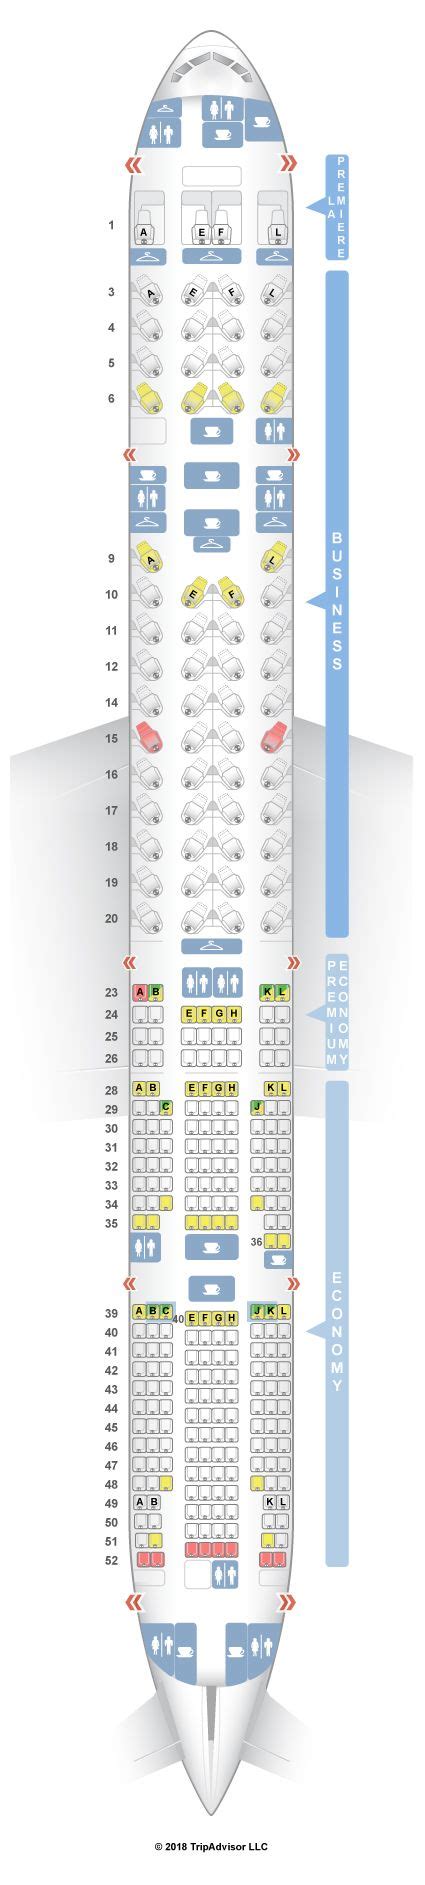 Seat Map And Seating Chart Boeing Er Air France Four Class V Hot Sex